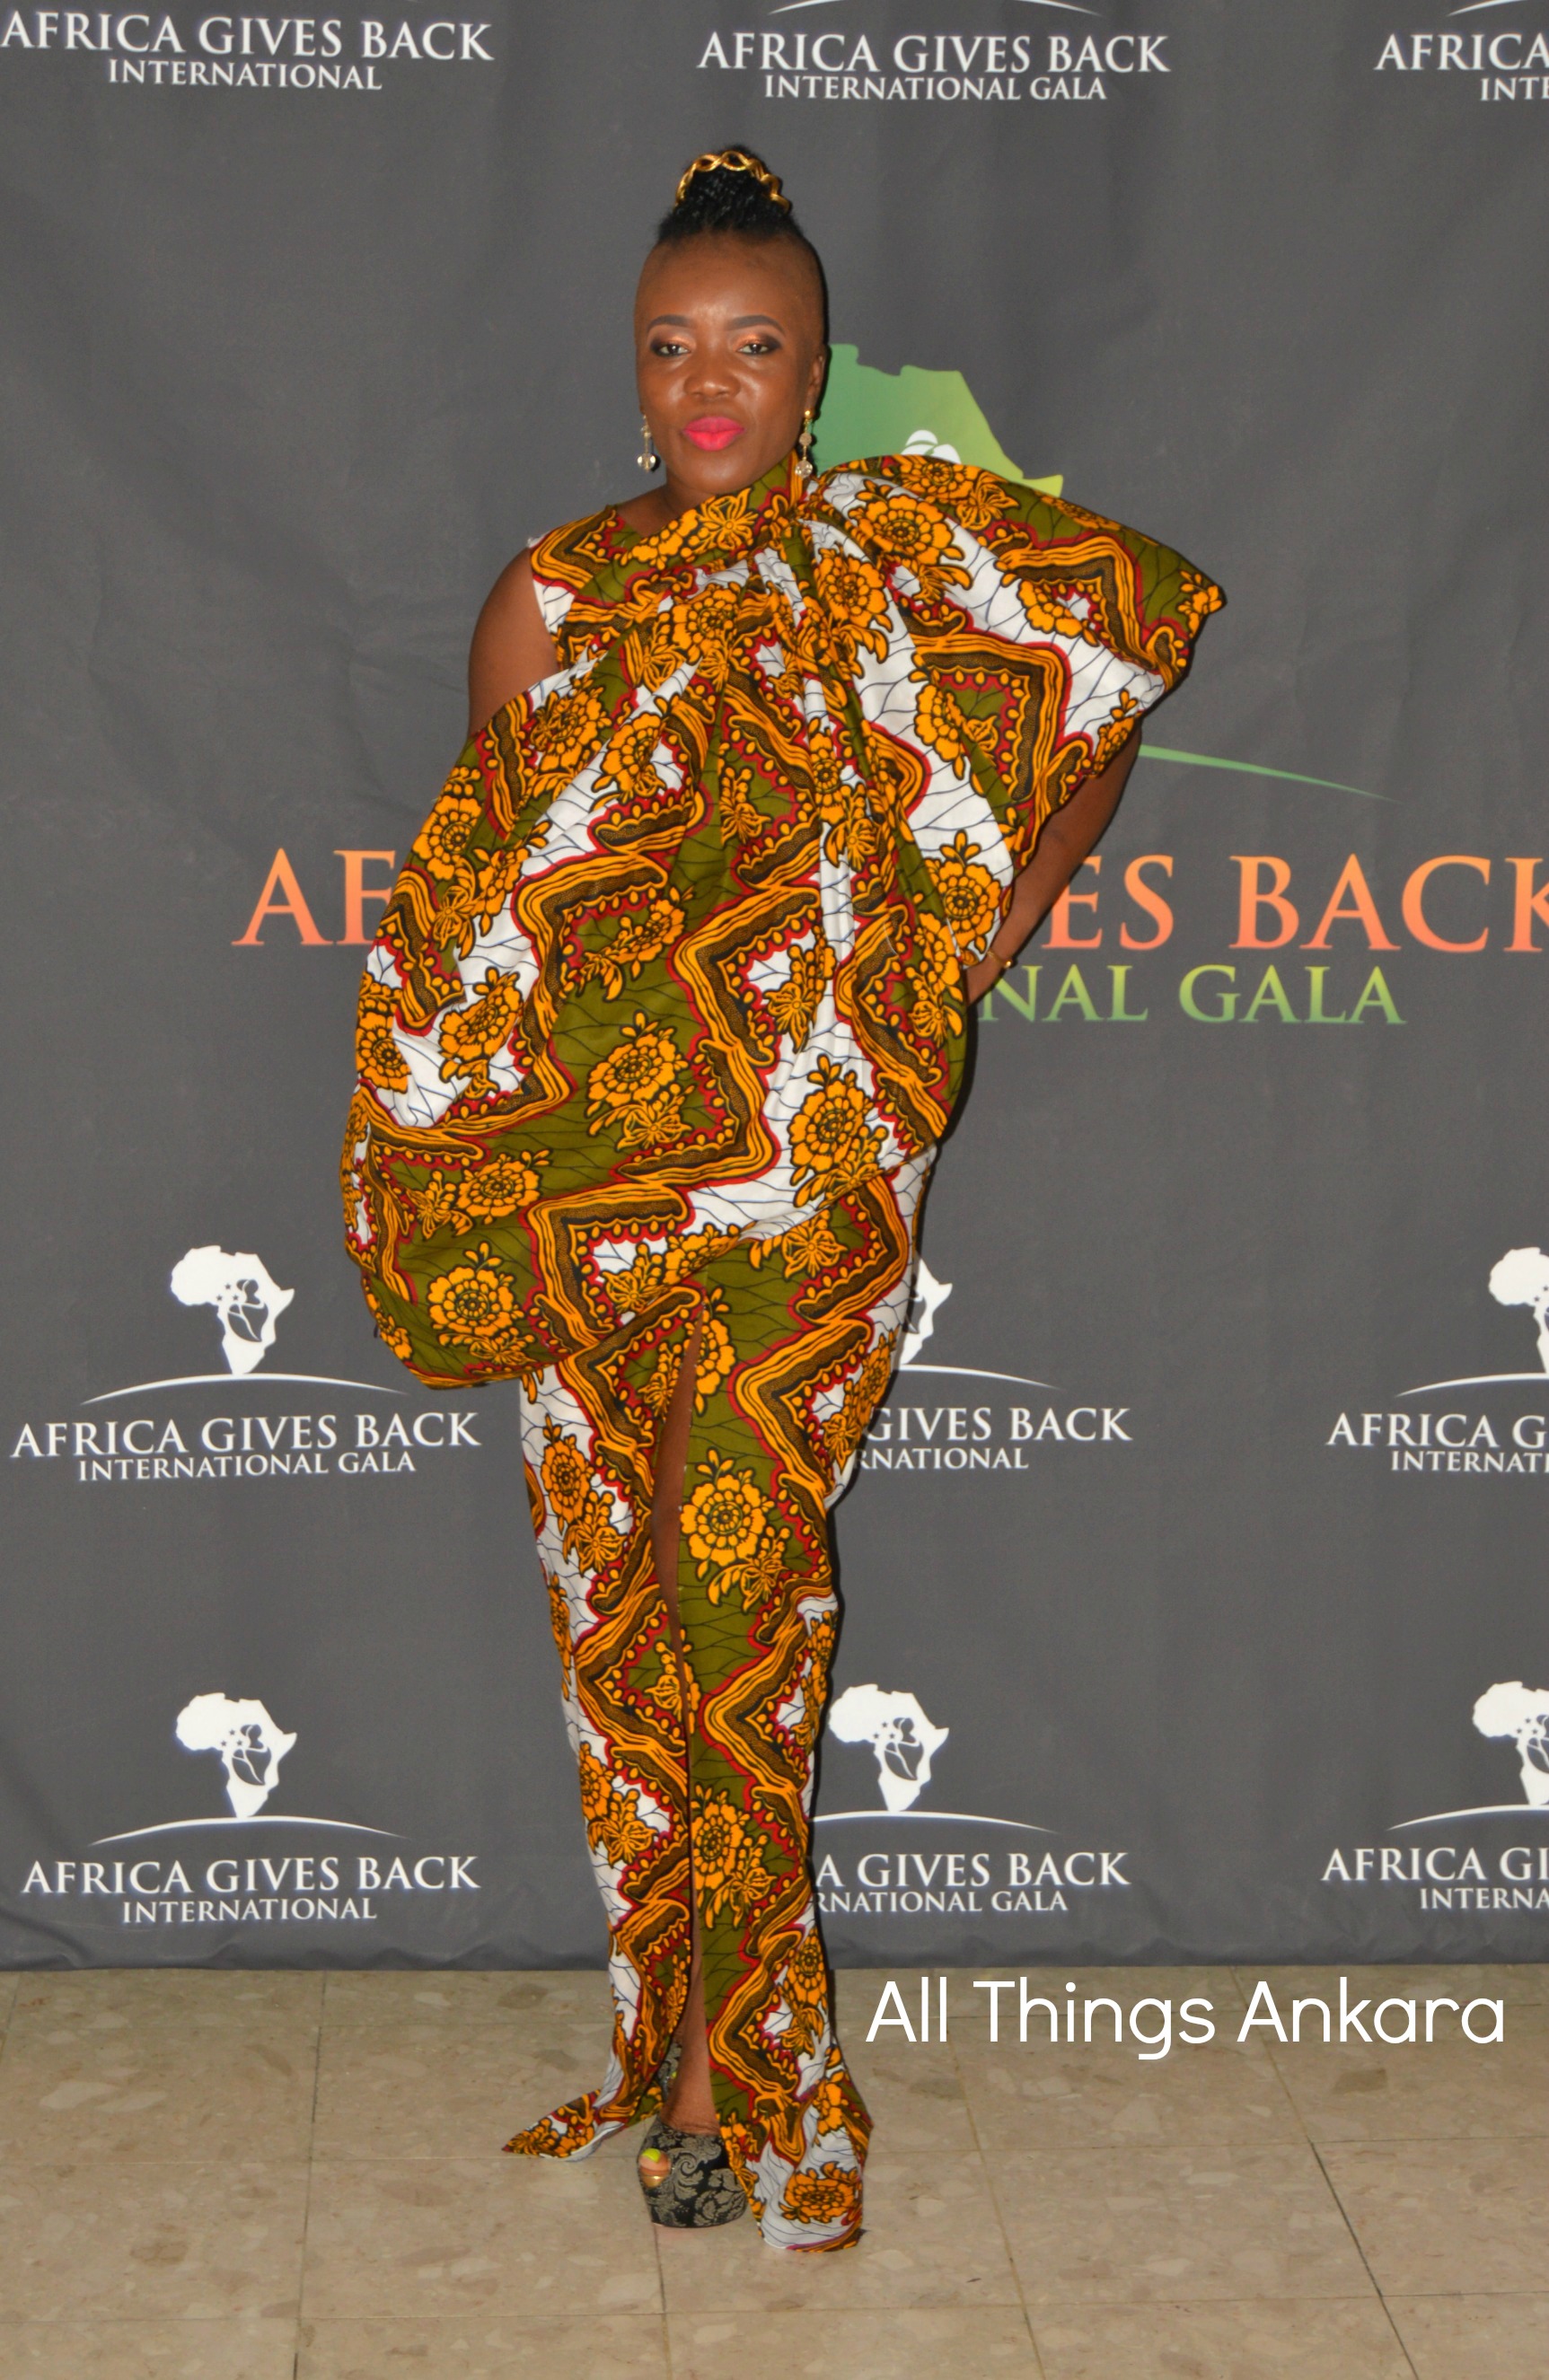 Gala-All Things Ankara's Best Dressed Women at Africa Gives Back International Gala 2016 2